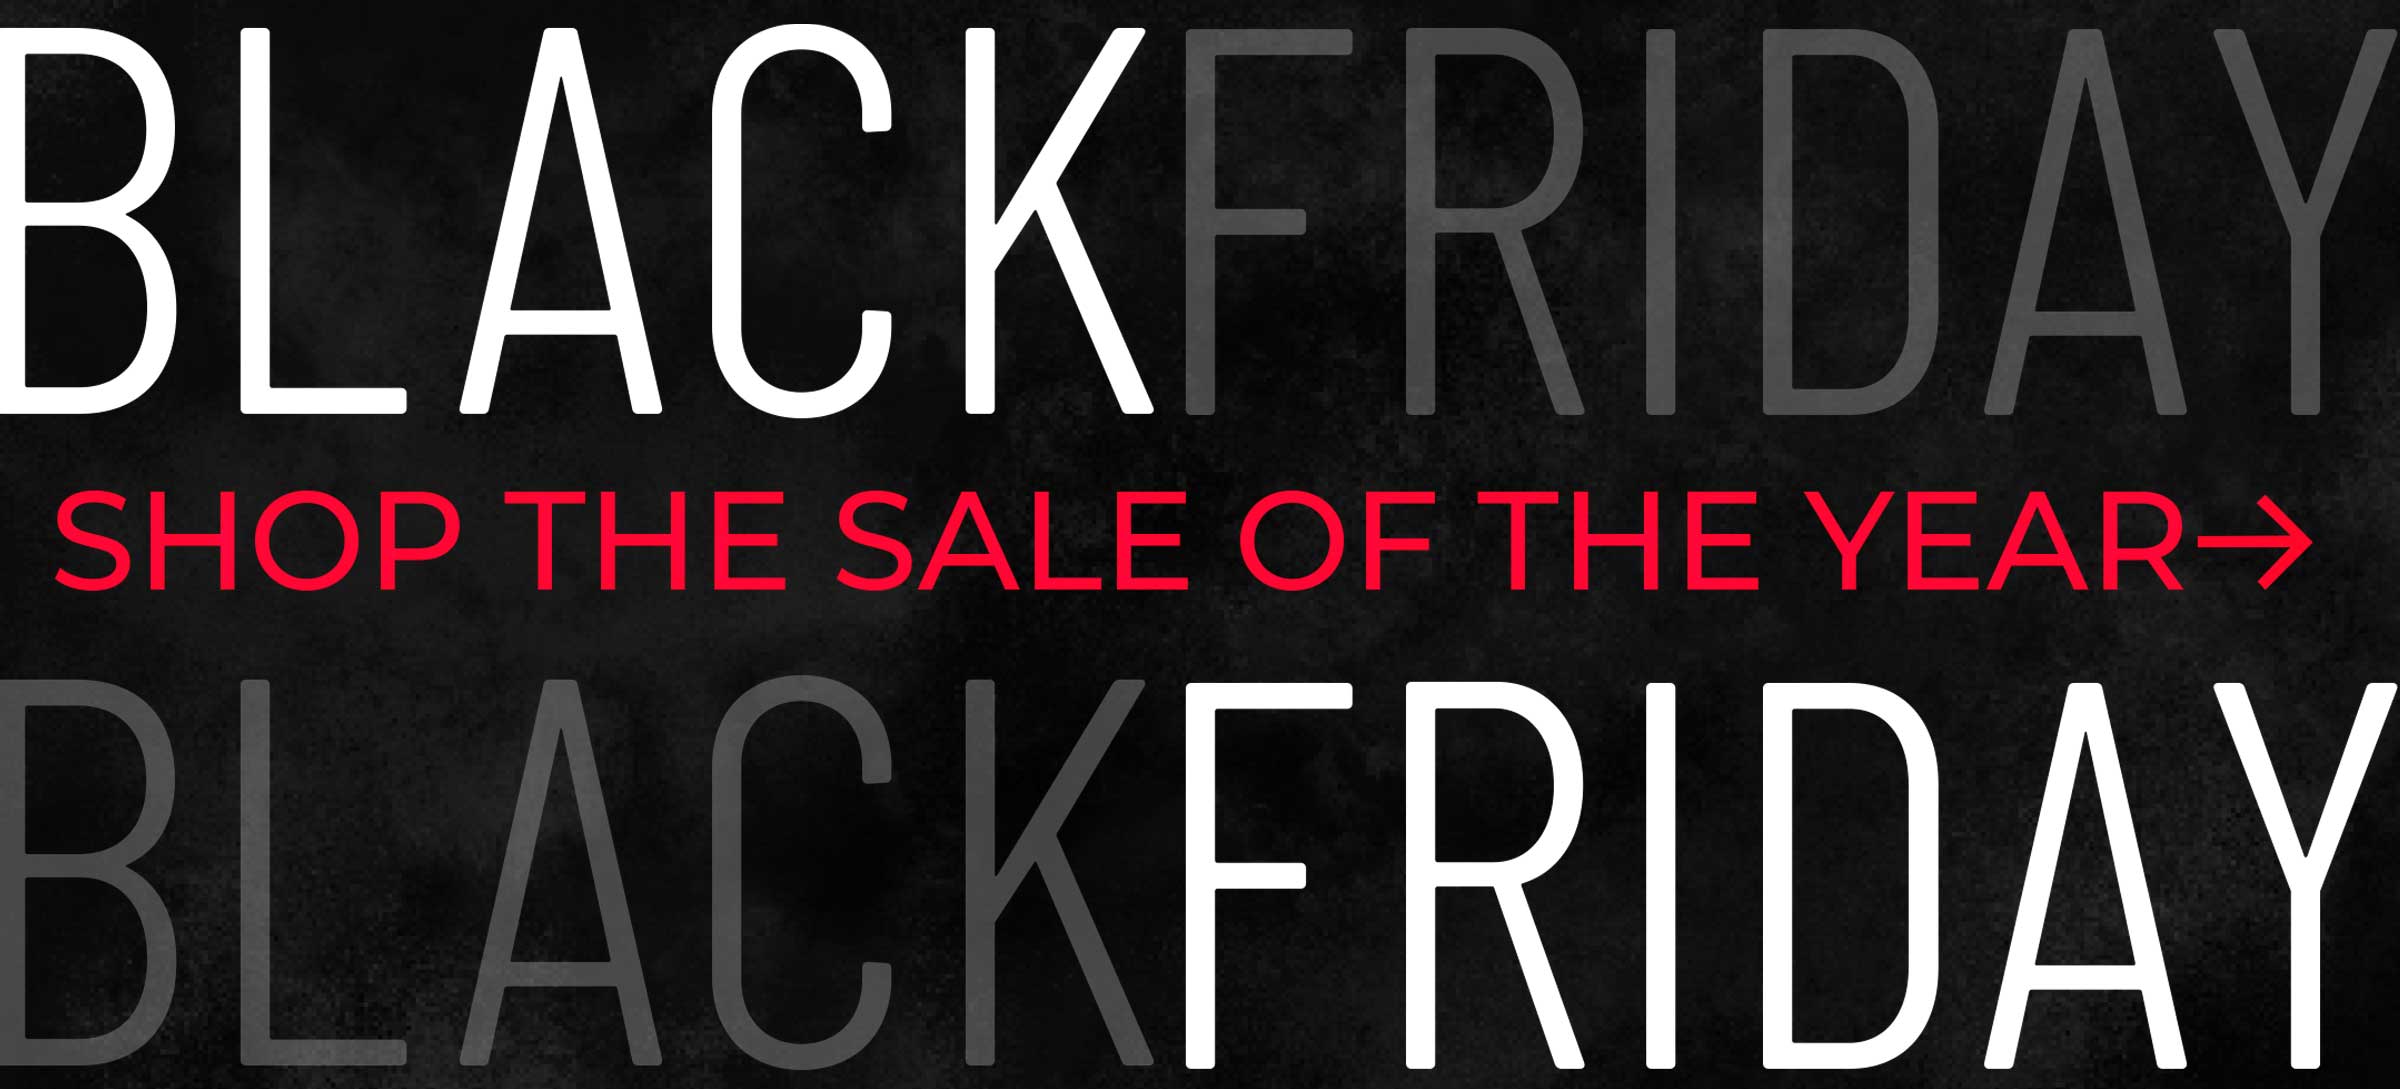 Black Friday - Shop the Sale of the Year